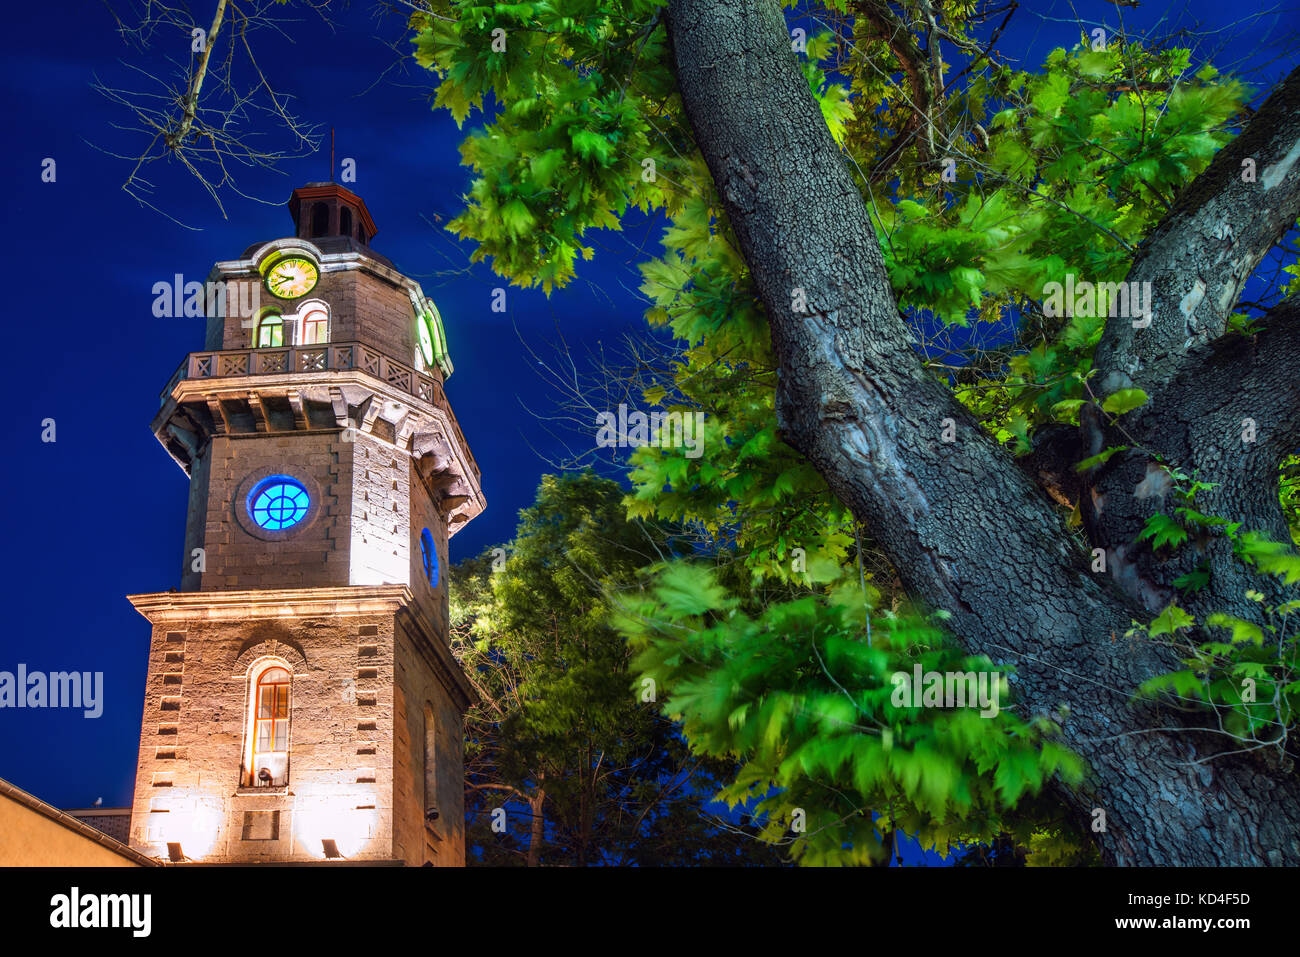 Historical clock tower in the city center of Varna, Bulgaria. It was built in 1890 by Sava Dimitrievich project. One of the most popular city landmark Stock Photo